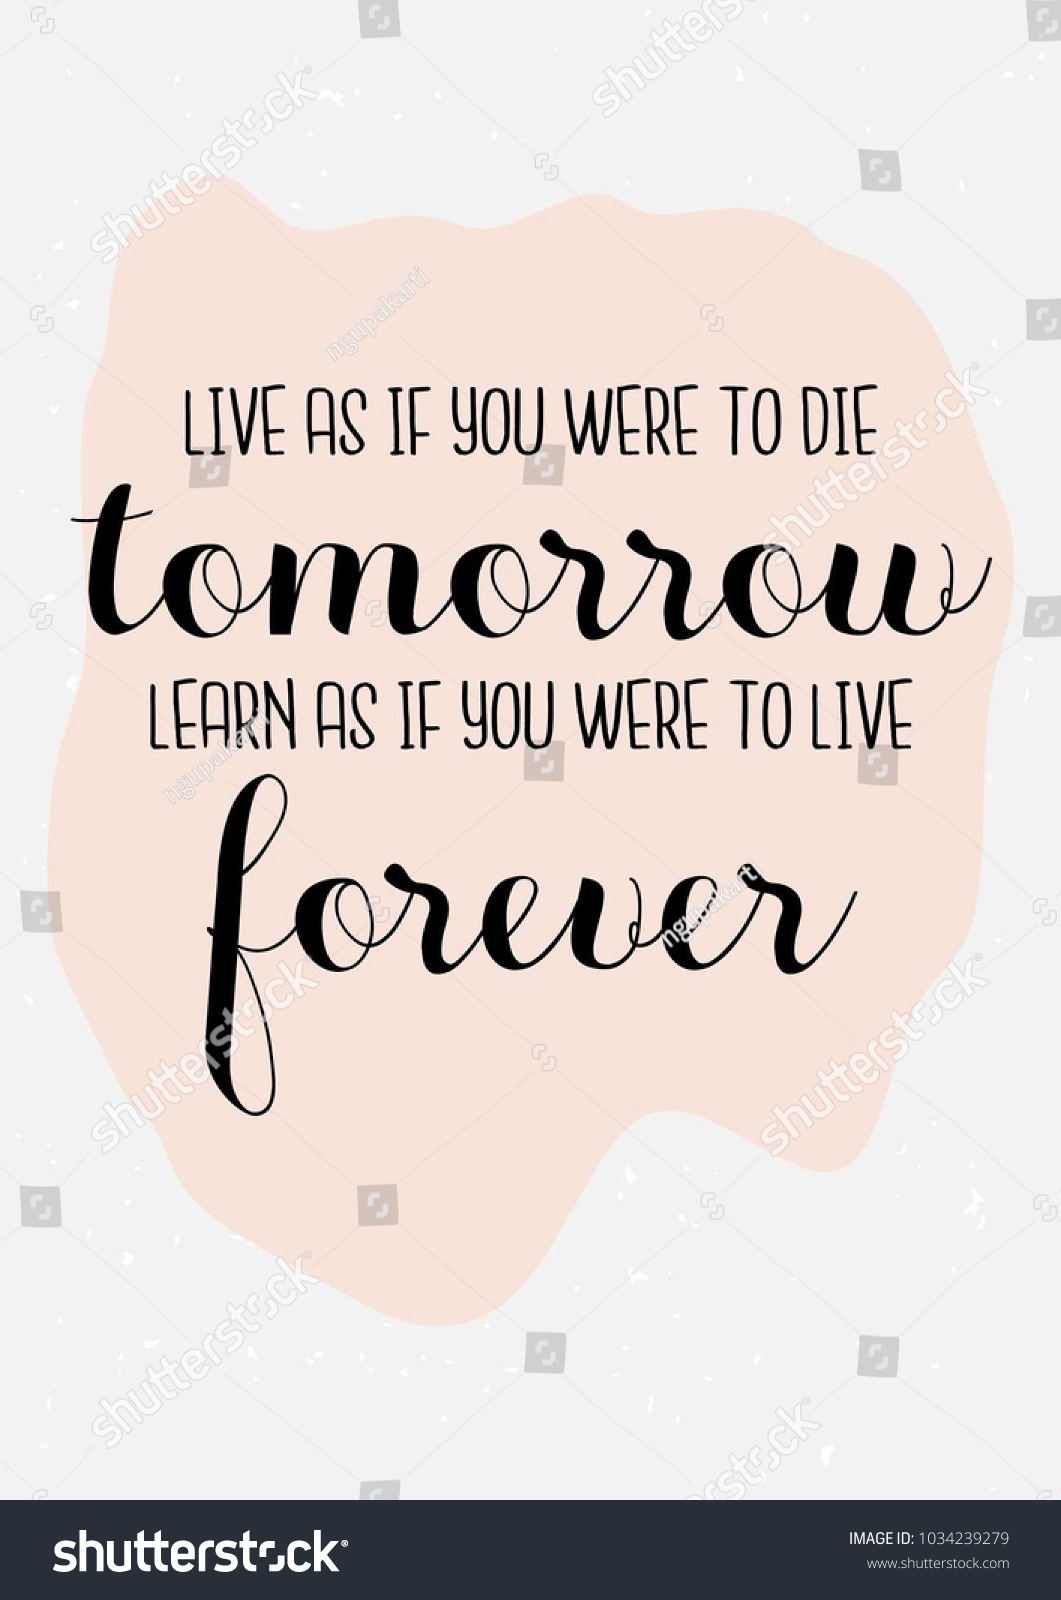 Quotes Poster Life You Were Die Stock Vector Royalty Free